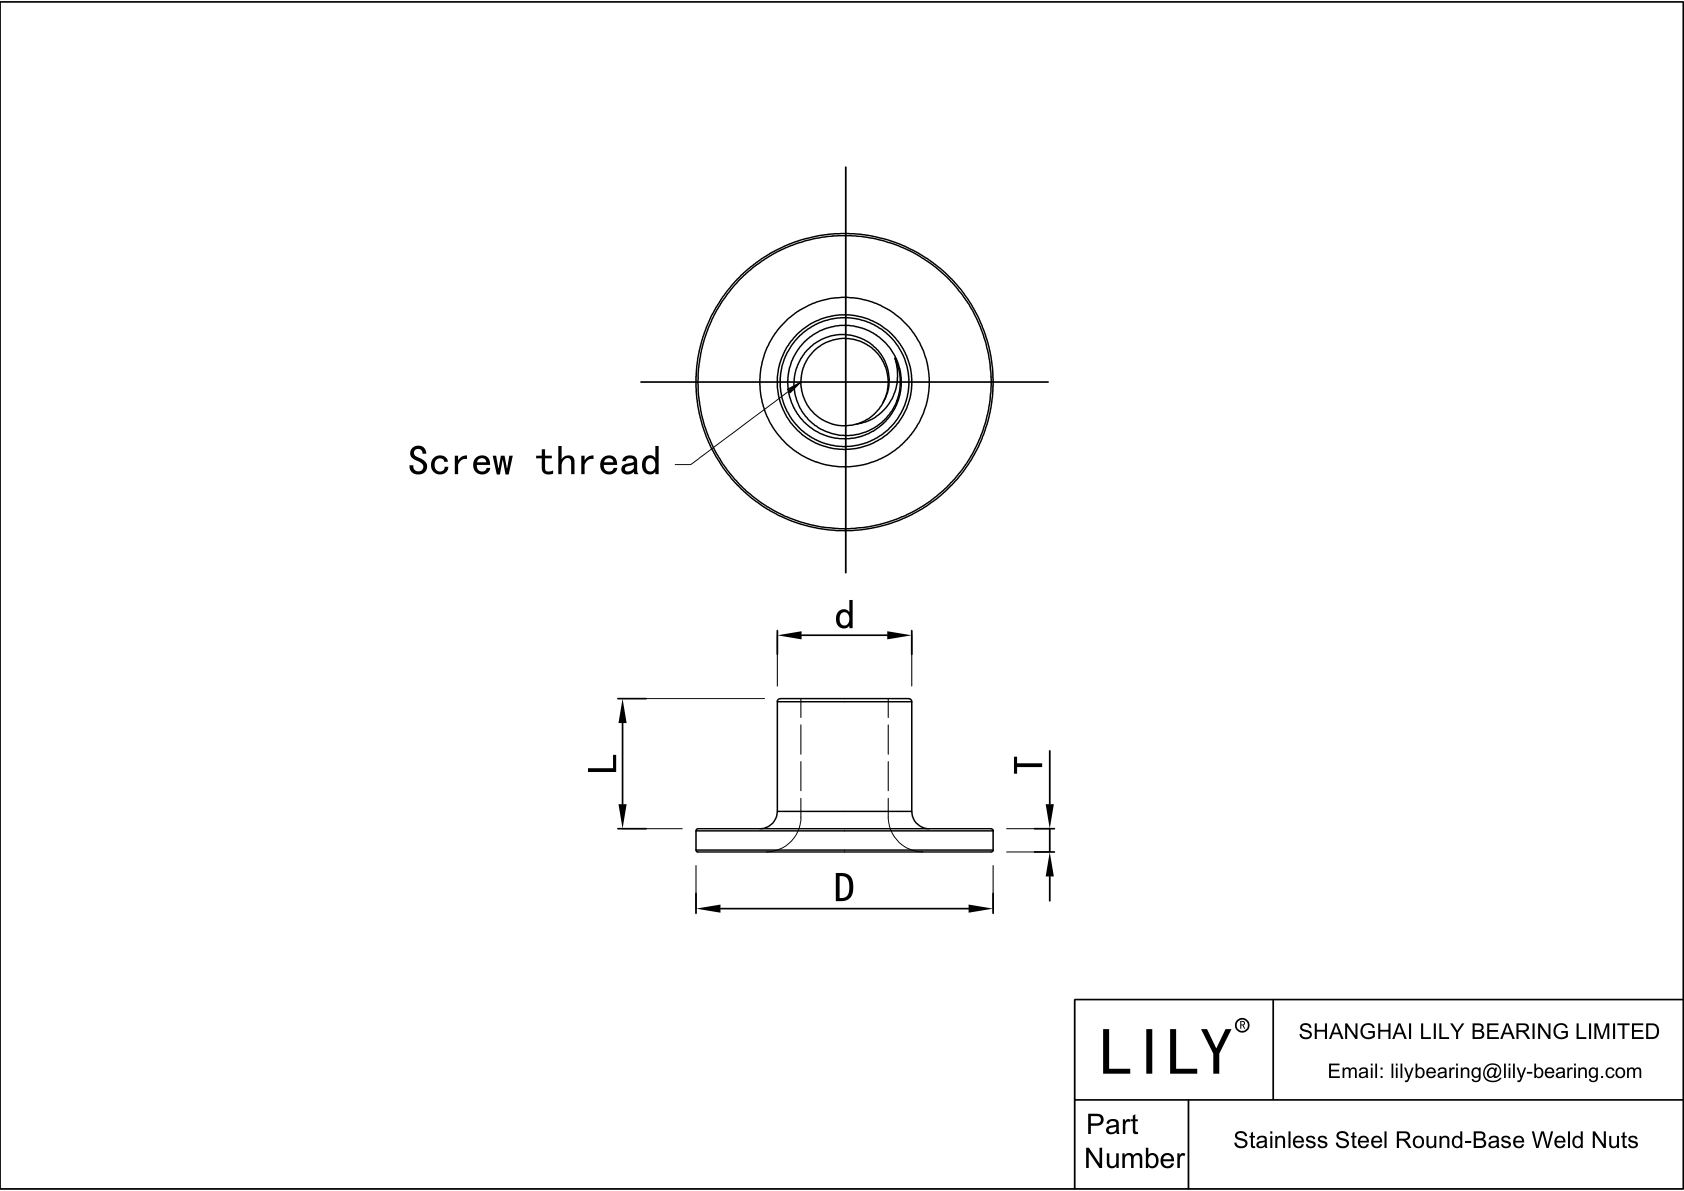 JAIGAABBE Stainless Steel Round-Base Weld Nuts cad drawing